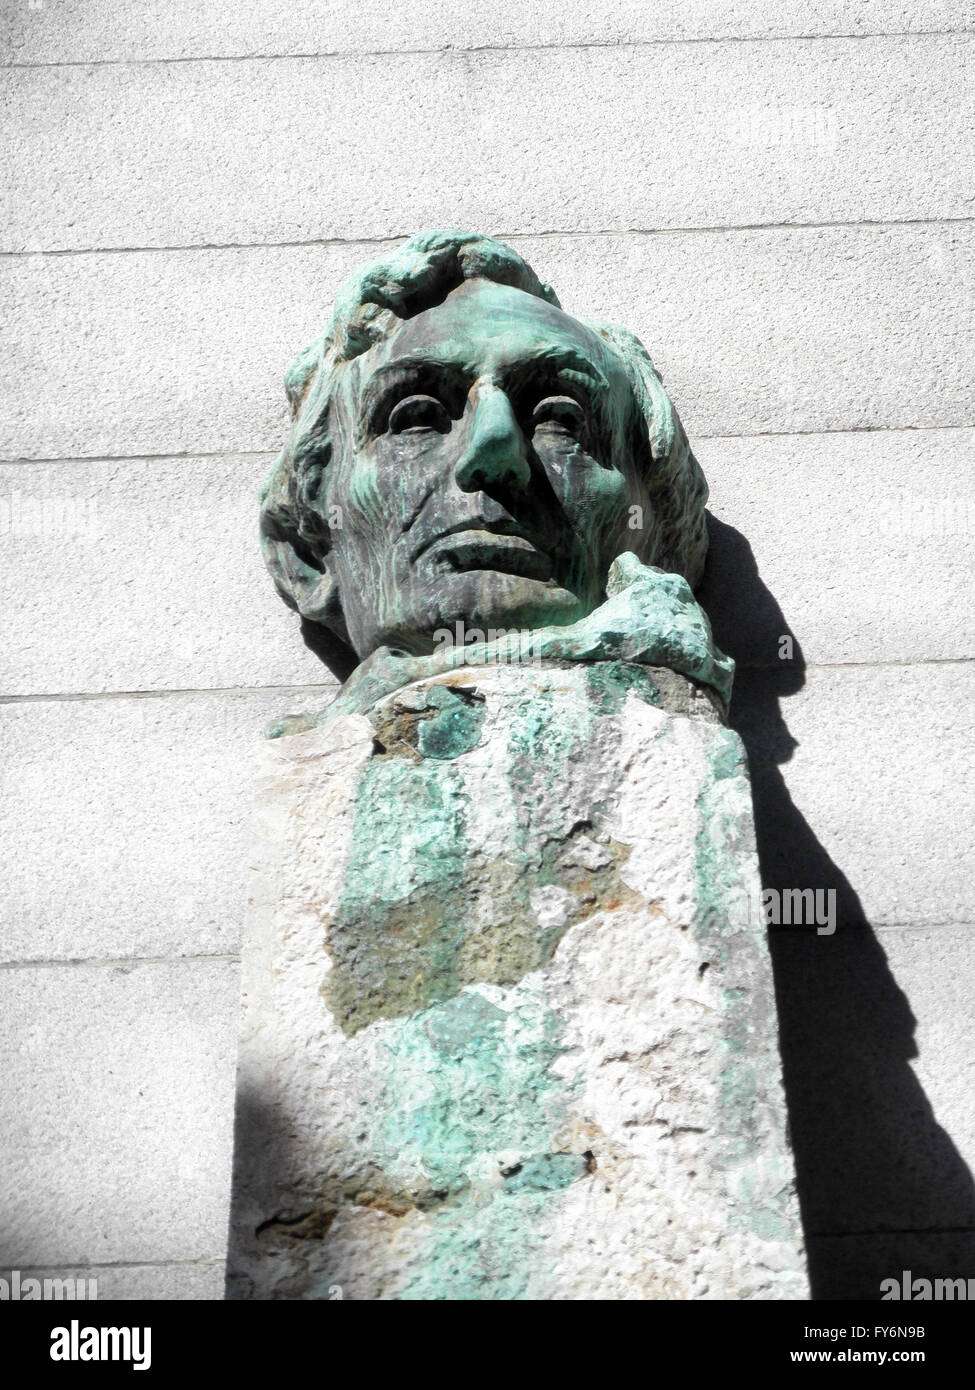 Face Statue of President Abe Lincoln sitting on a pedestal on the campus of UC Berkeley. With Green dripping lines forming from Stock Photo